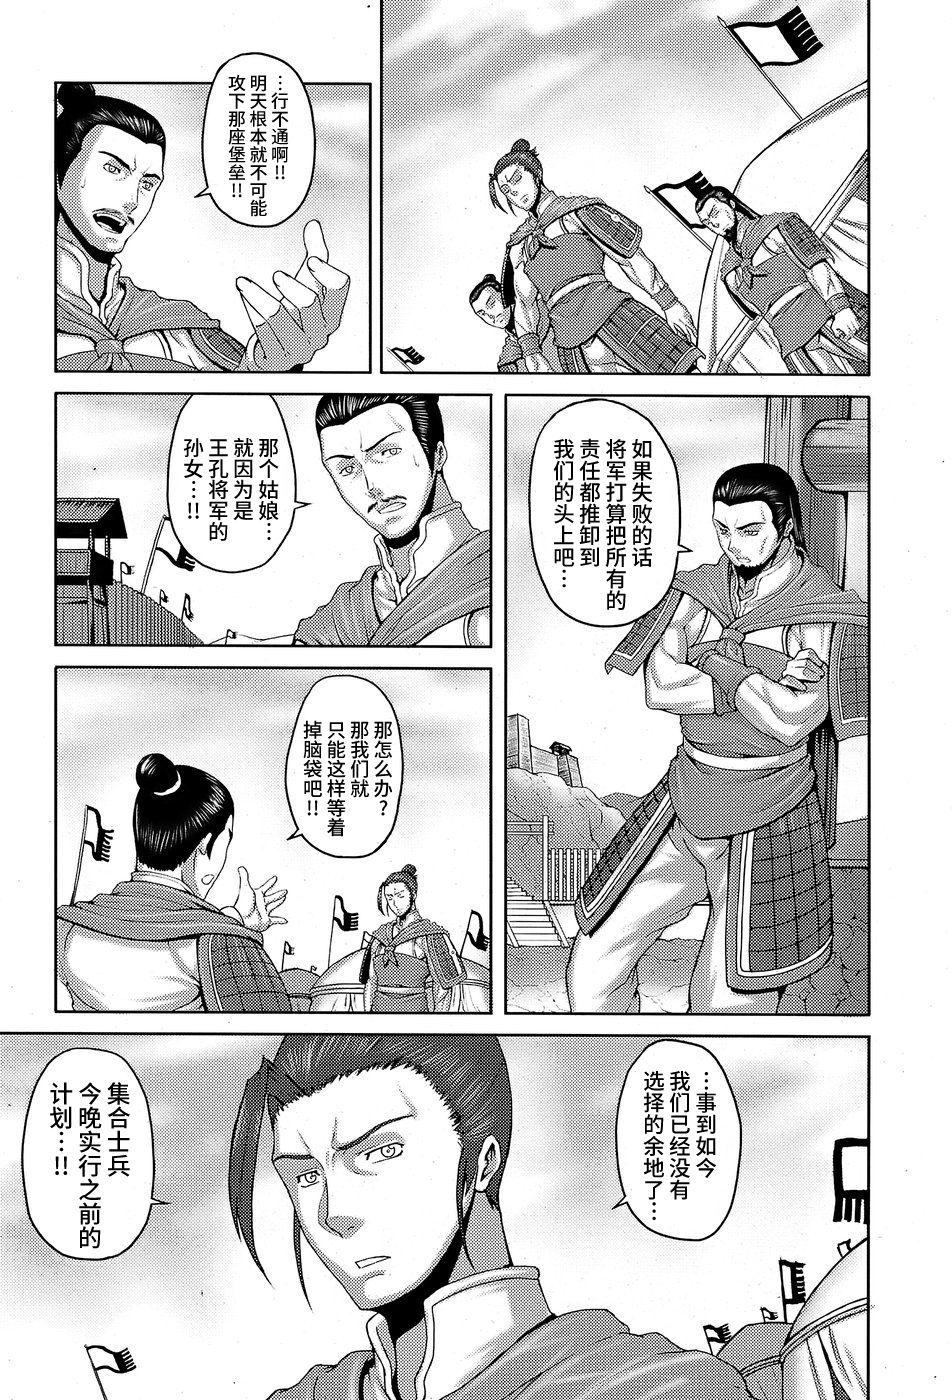 King will prefer not to have any kind or Johnny (Comic Penguin Club Pirate Edition August 2008) Chinese translation (21 pages)-第1章-图片319